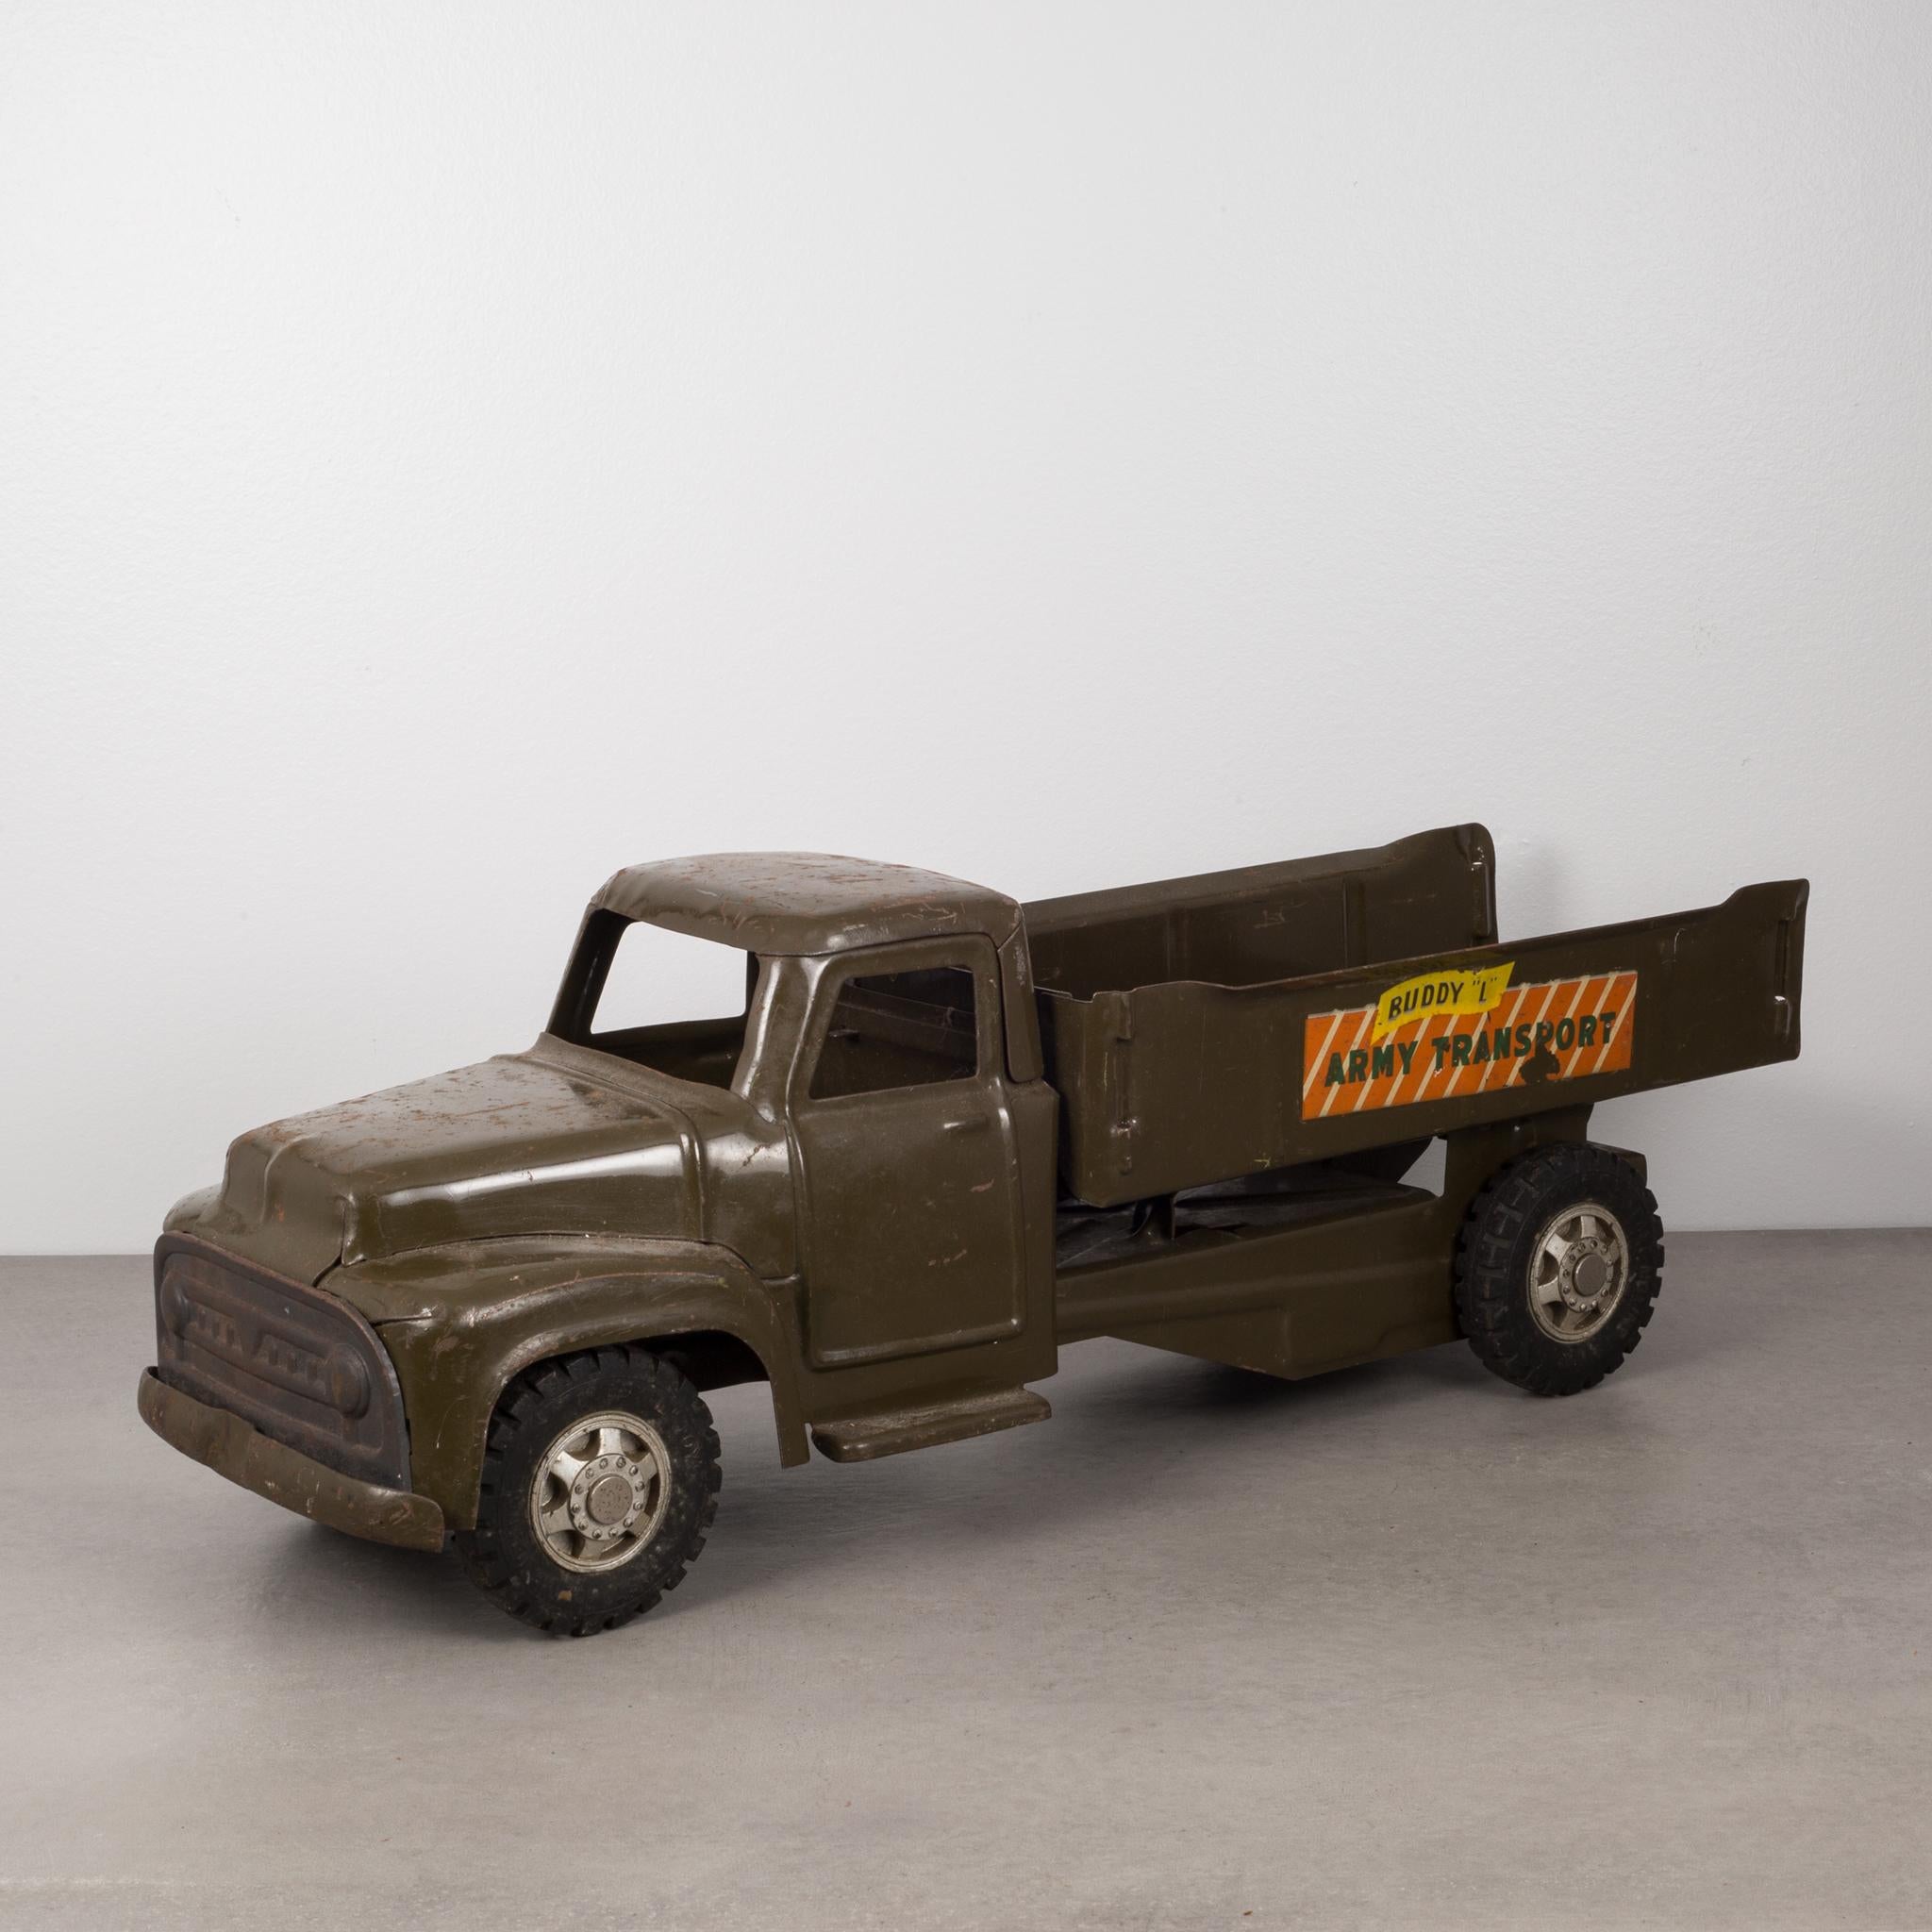 About

This is an original die cast steel toy truck with rubber wheels, finished in army-green powder coating by the Buddy L Corporation. The truck has advertising on both sides that reads 